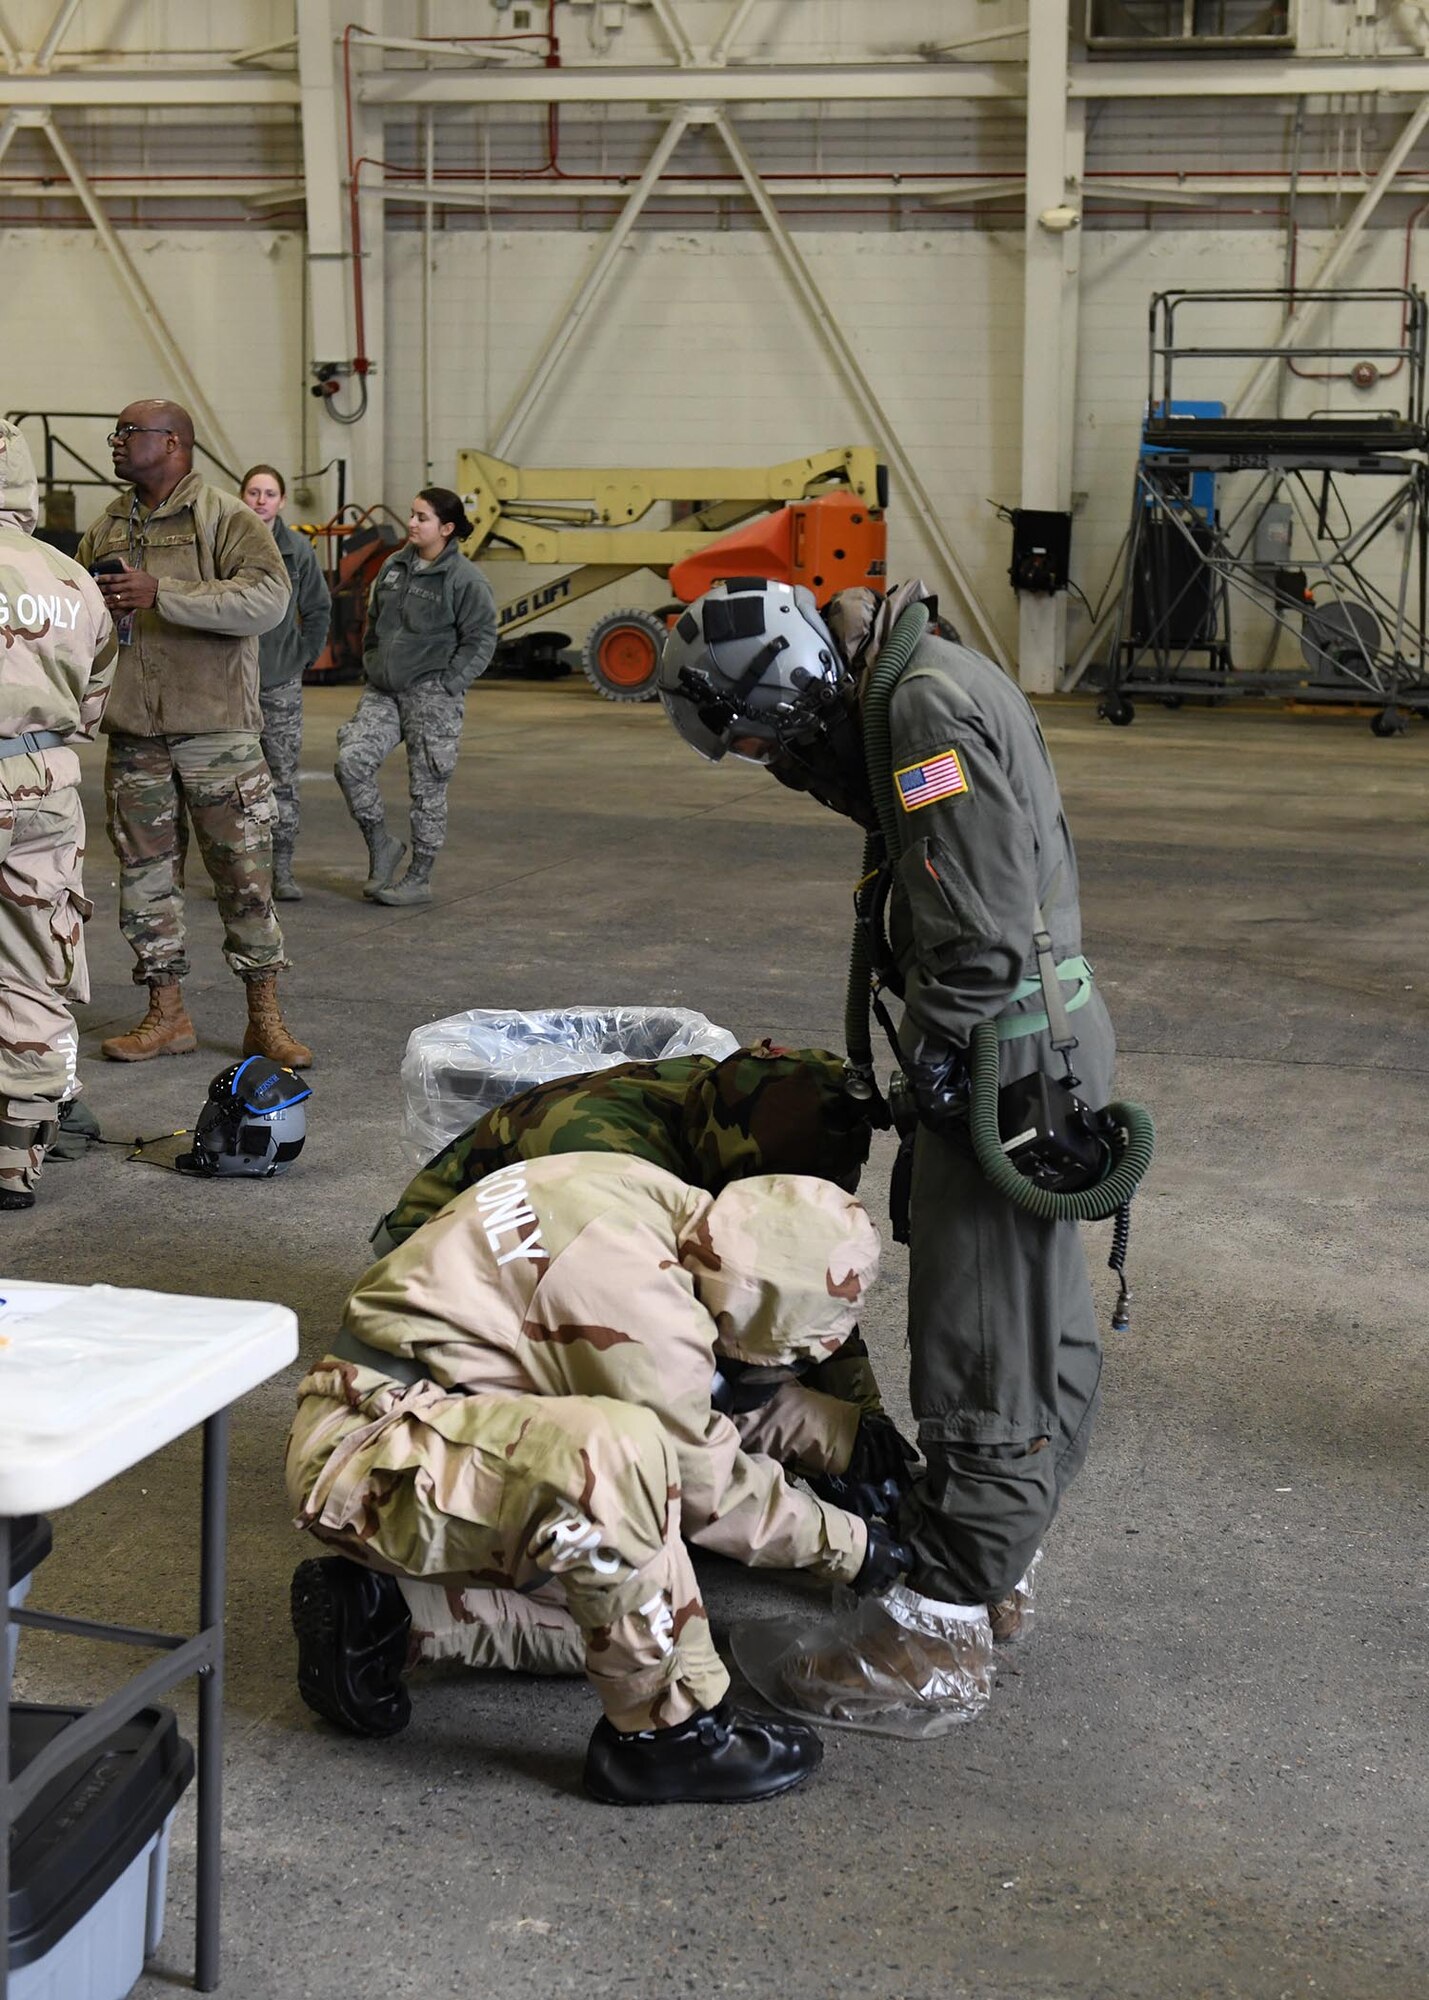 Two Airmen untie another Airman's boots.